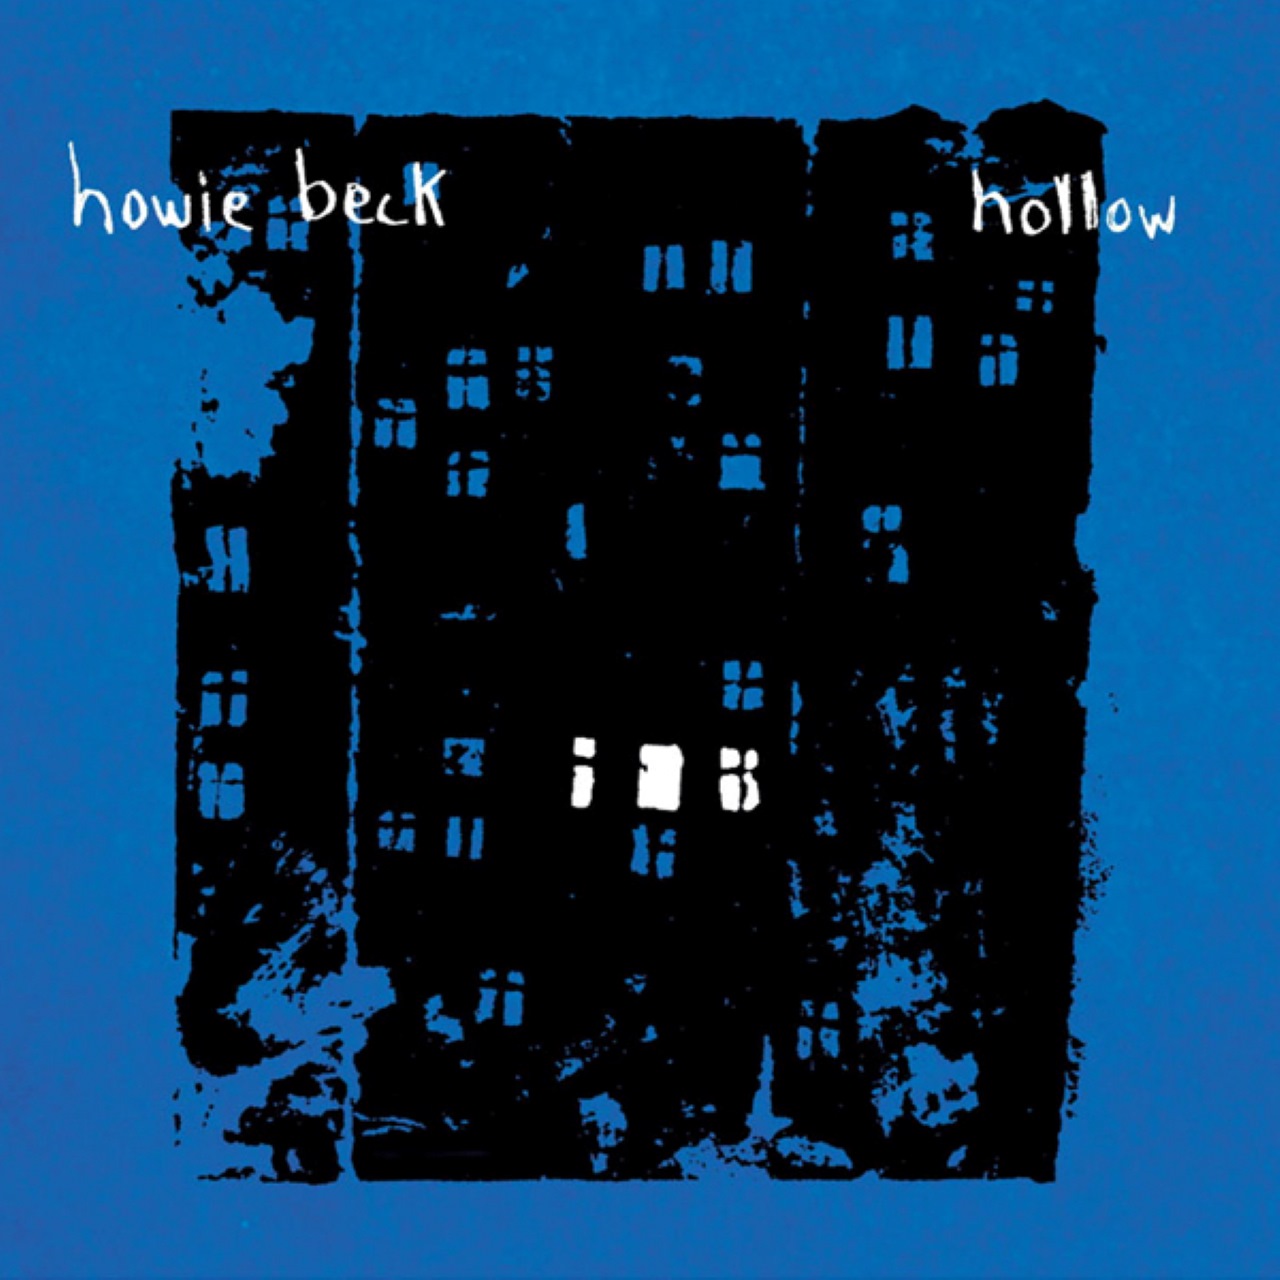 Howie Beck – Hollow cover album